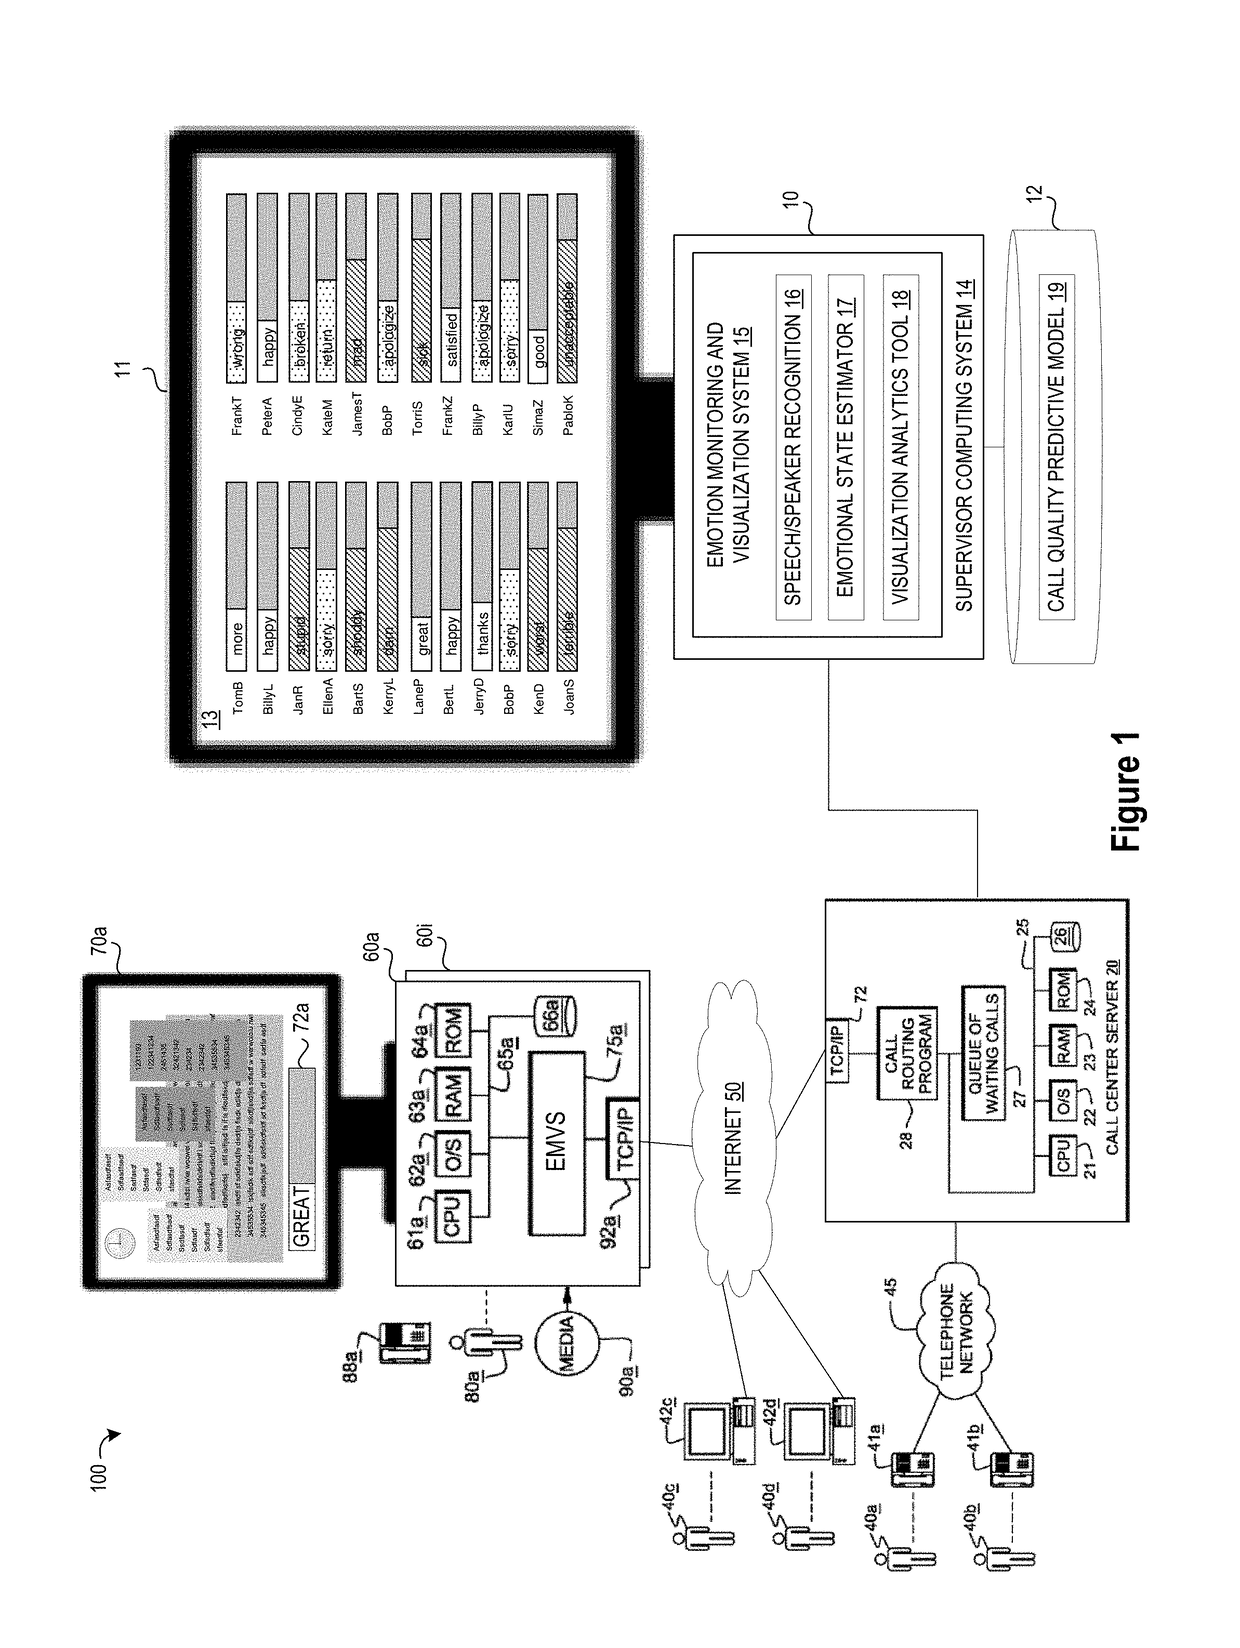 System and method for monitoring and visualizing emotions in call center dialogs by call center supervisors